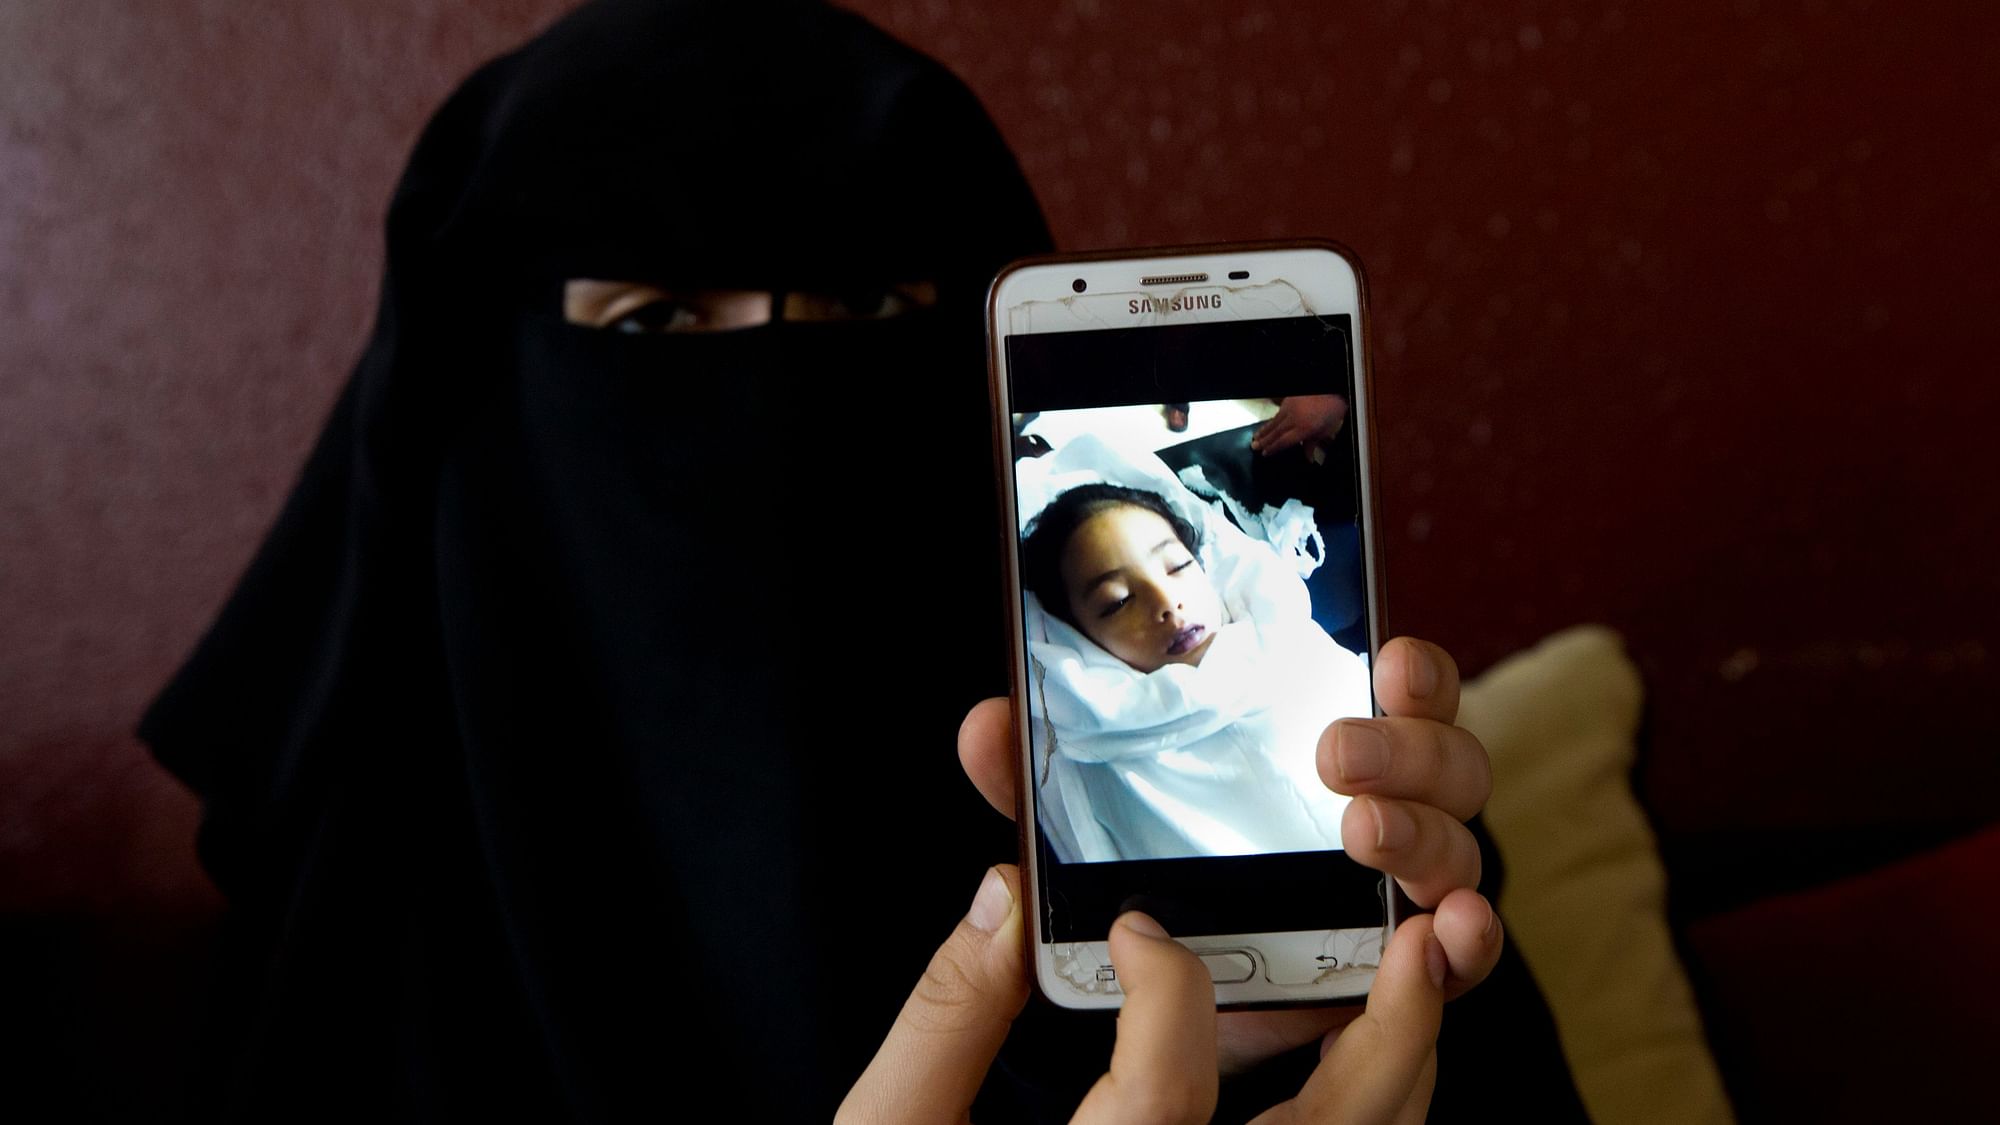  Muna Awad, mother of 5-year-old Aisha a-Lulu, shows a photo of her daughter while Aisha is in a Jerusalem hospital, at the family home in Burij refugee camp, central Gaza Strip.&nbsp;